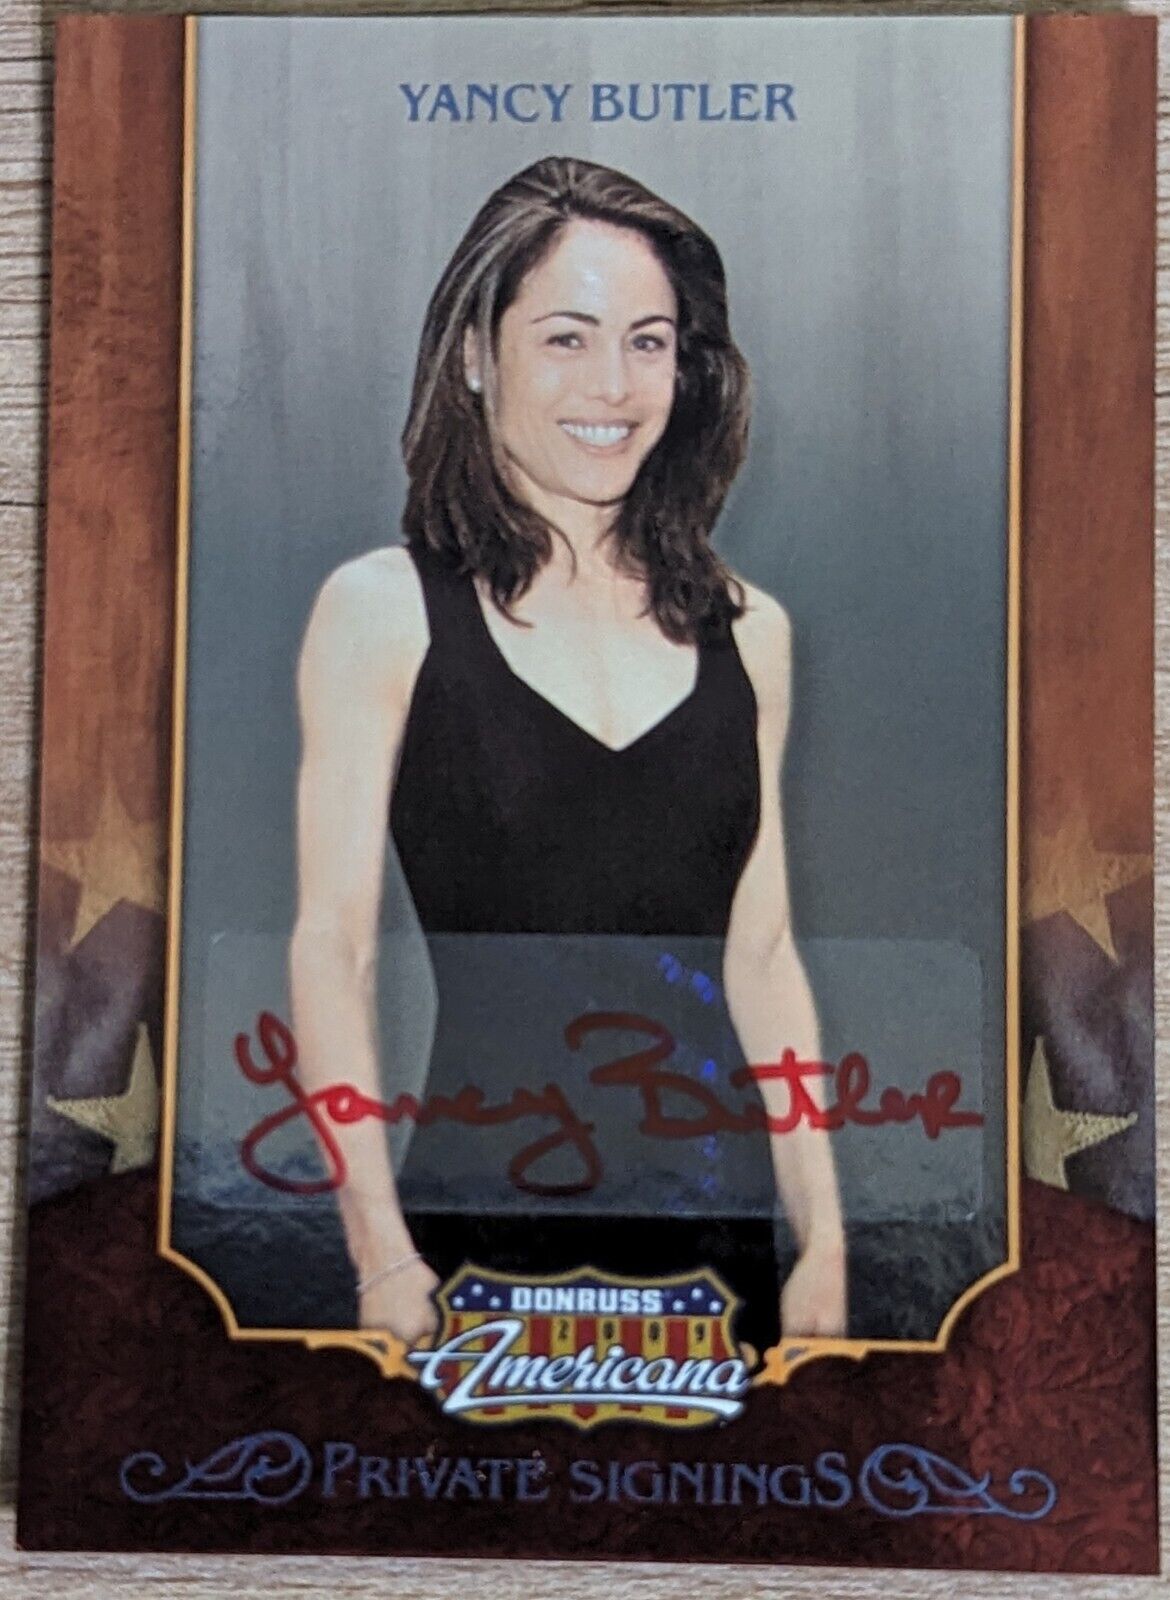 2009 Donruss Americana Yancy Butler Autographed Card 87/106 Red Ink